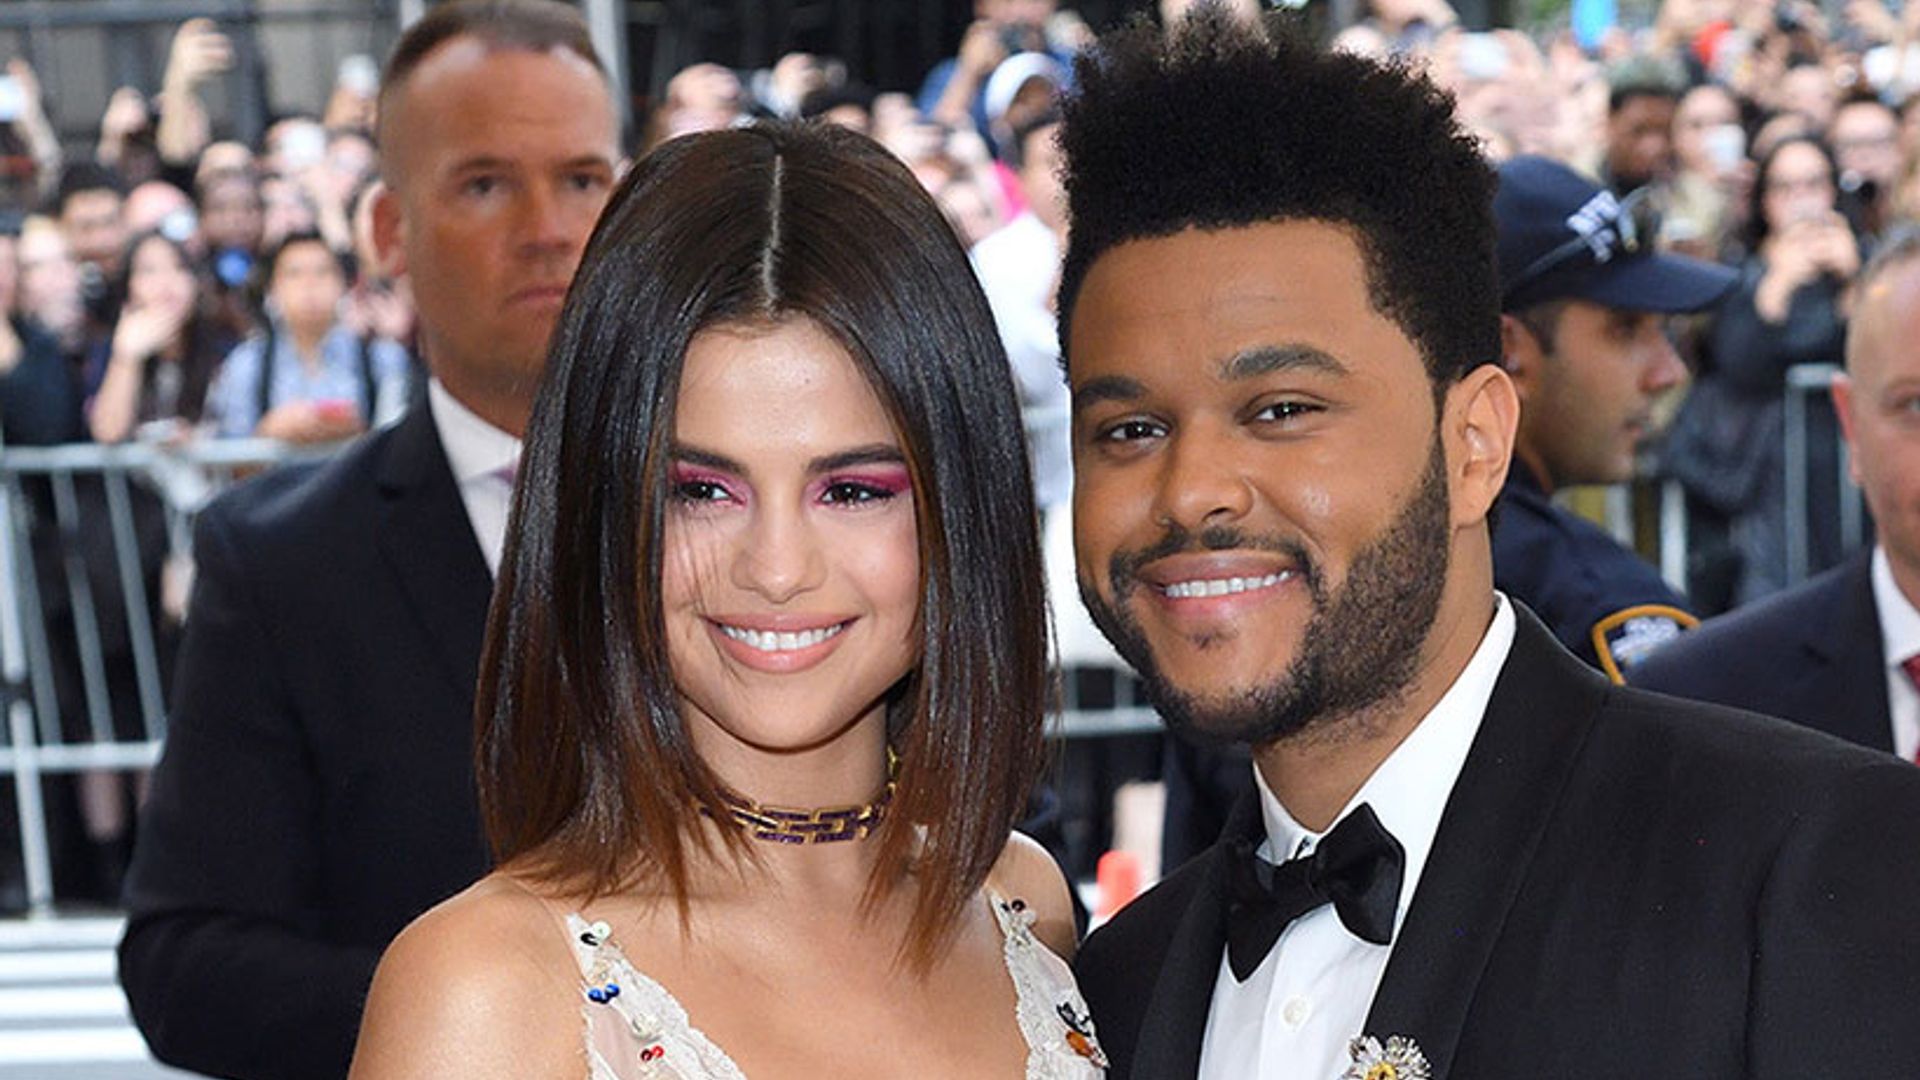 Selena Gomez isn't going to hide her romance with The Weeknd